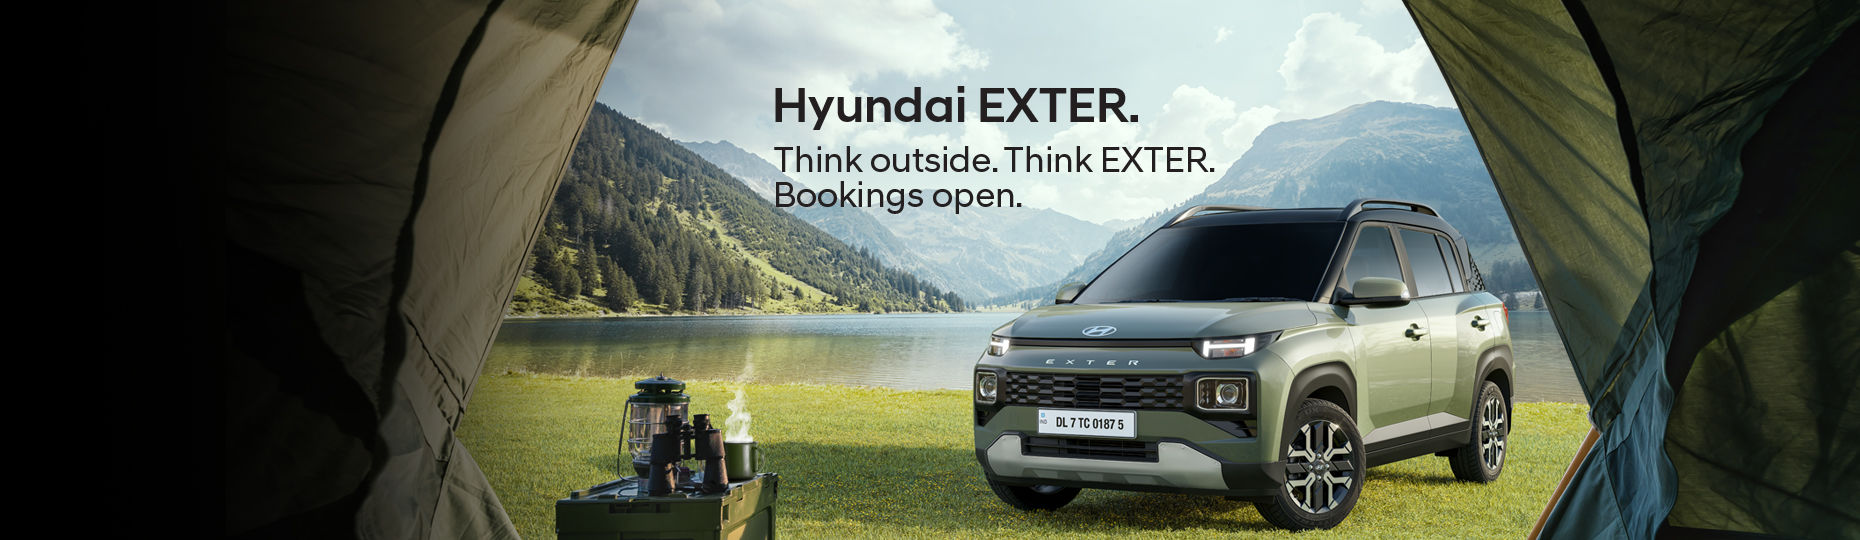 Hyundai Exter Micro SUV Bookings Open For Rs 11,000 in India  - front